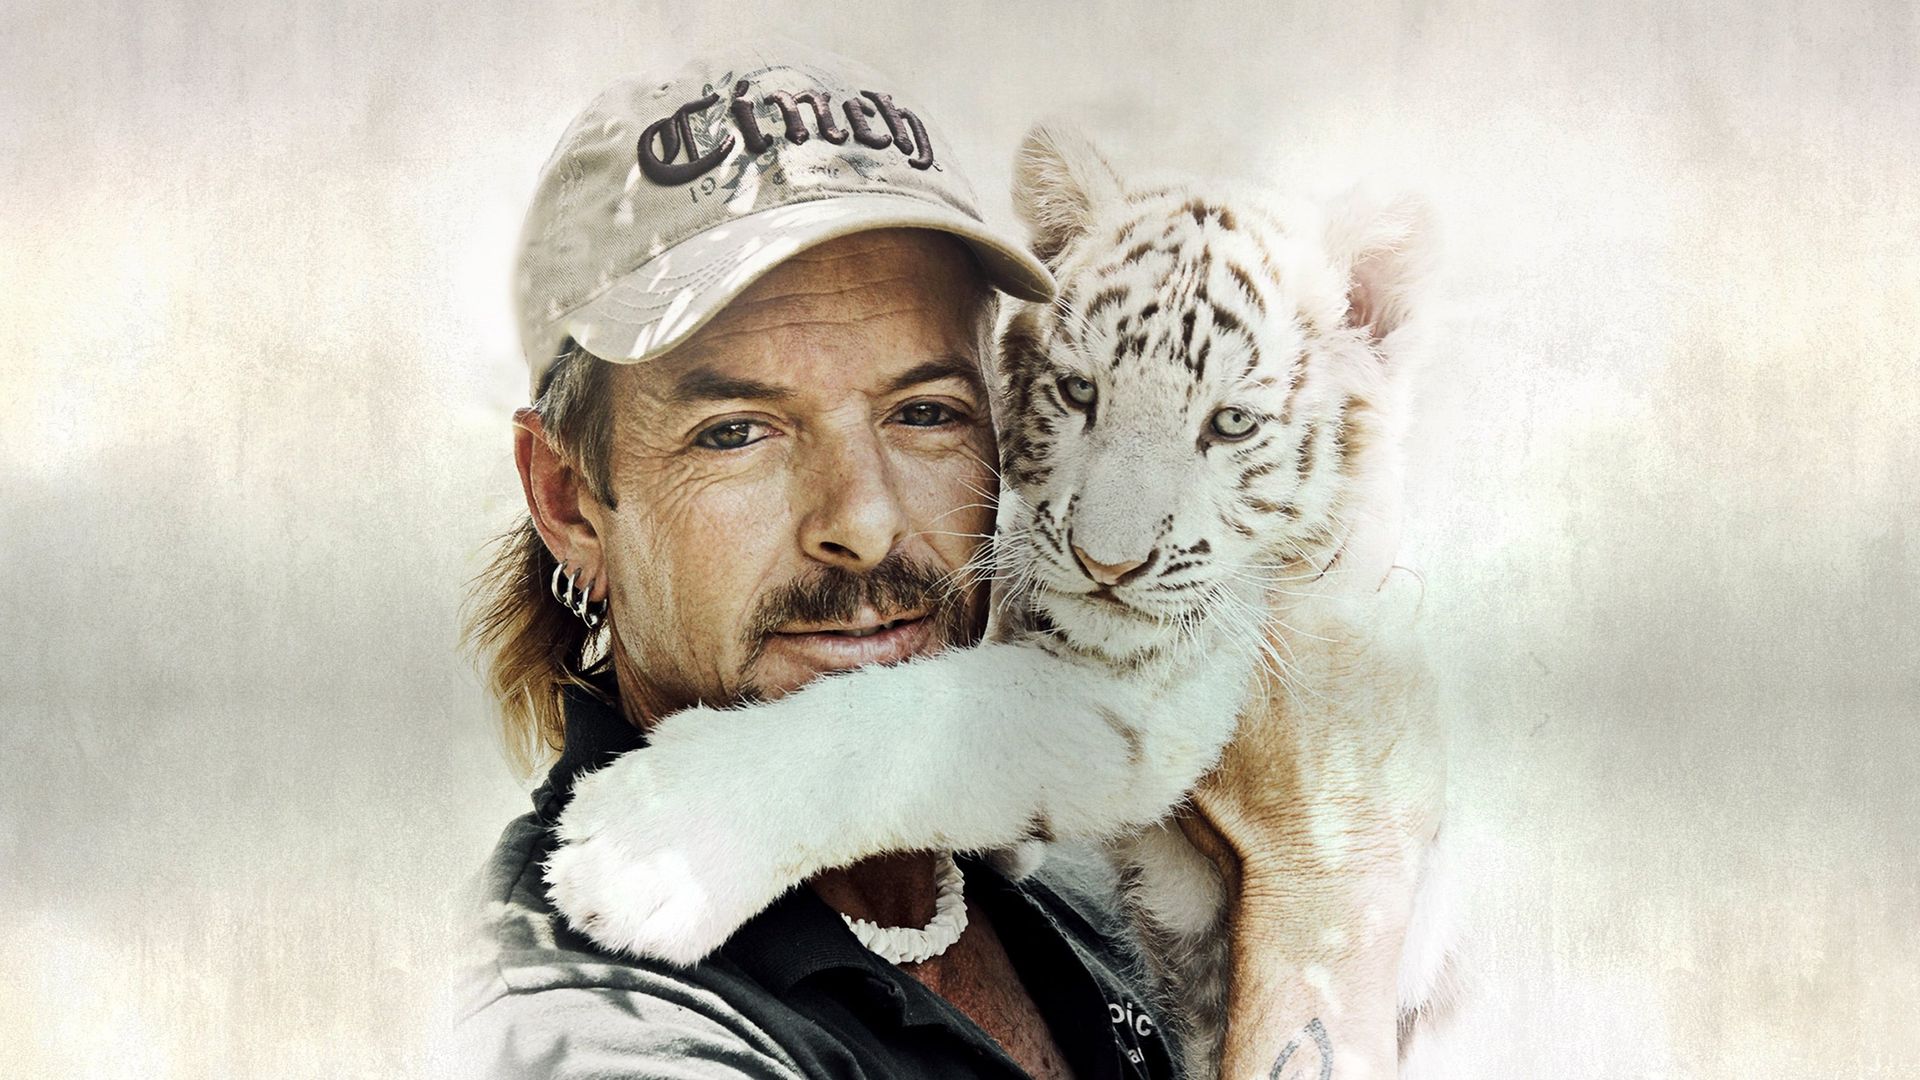 Joe Exotic: Tigers, Lies and Cover-Up background